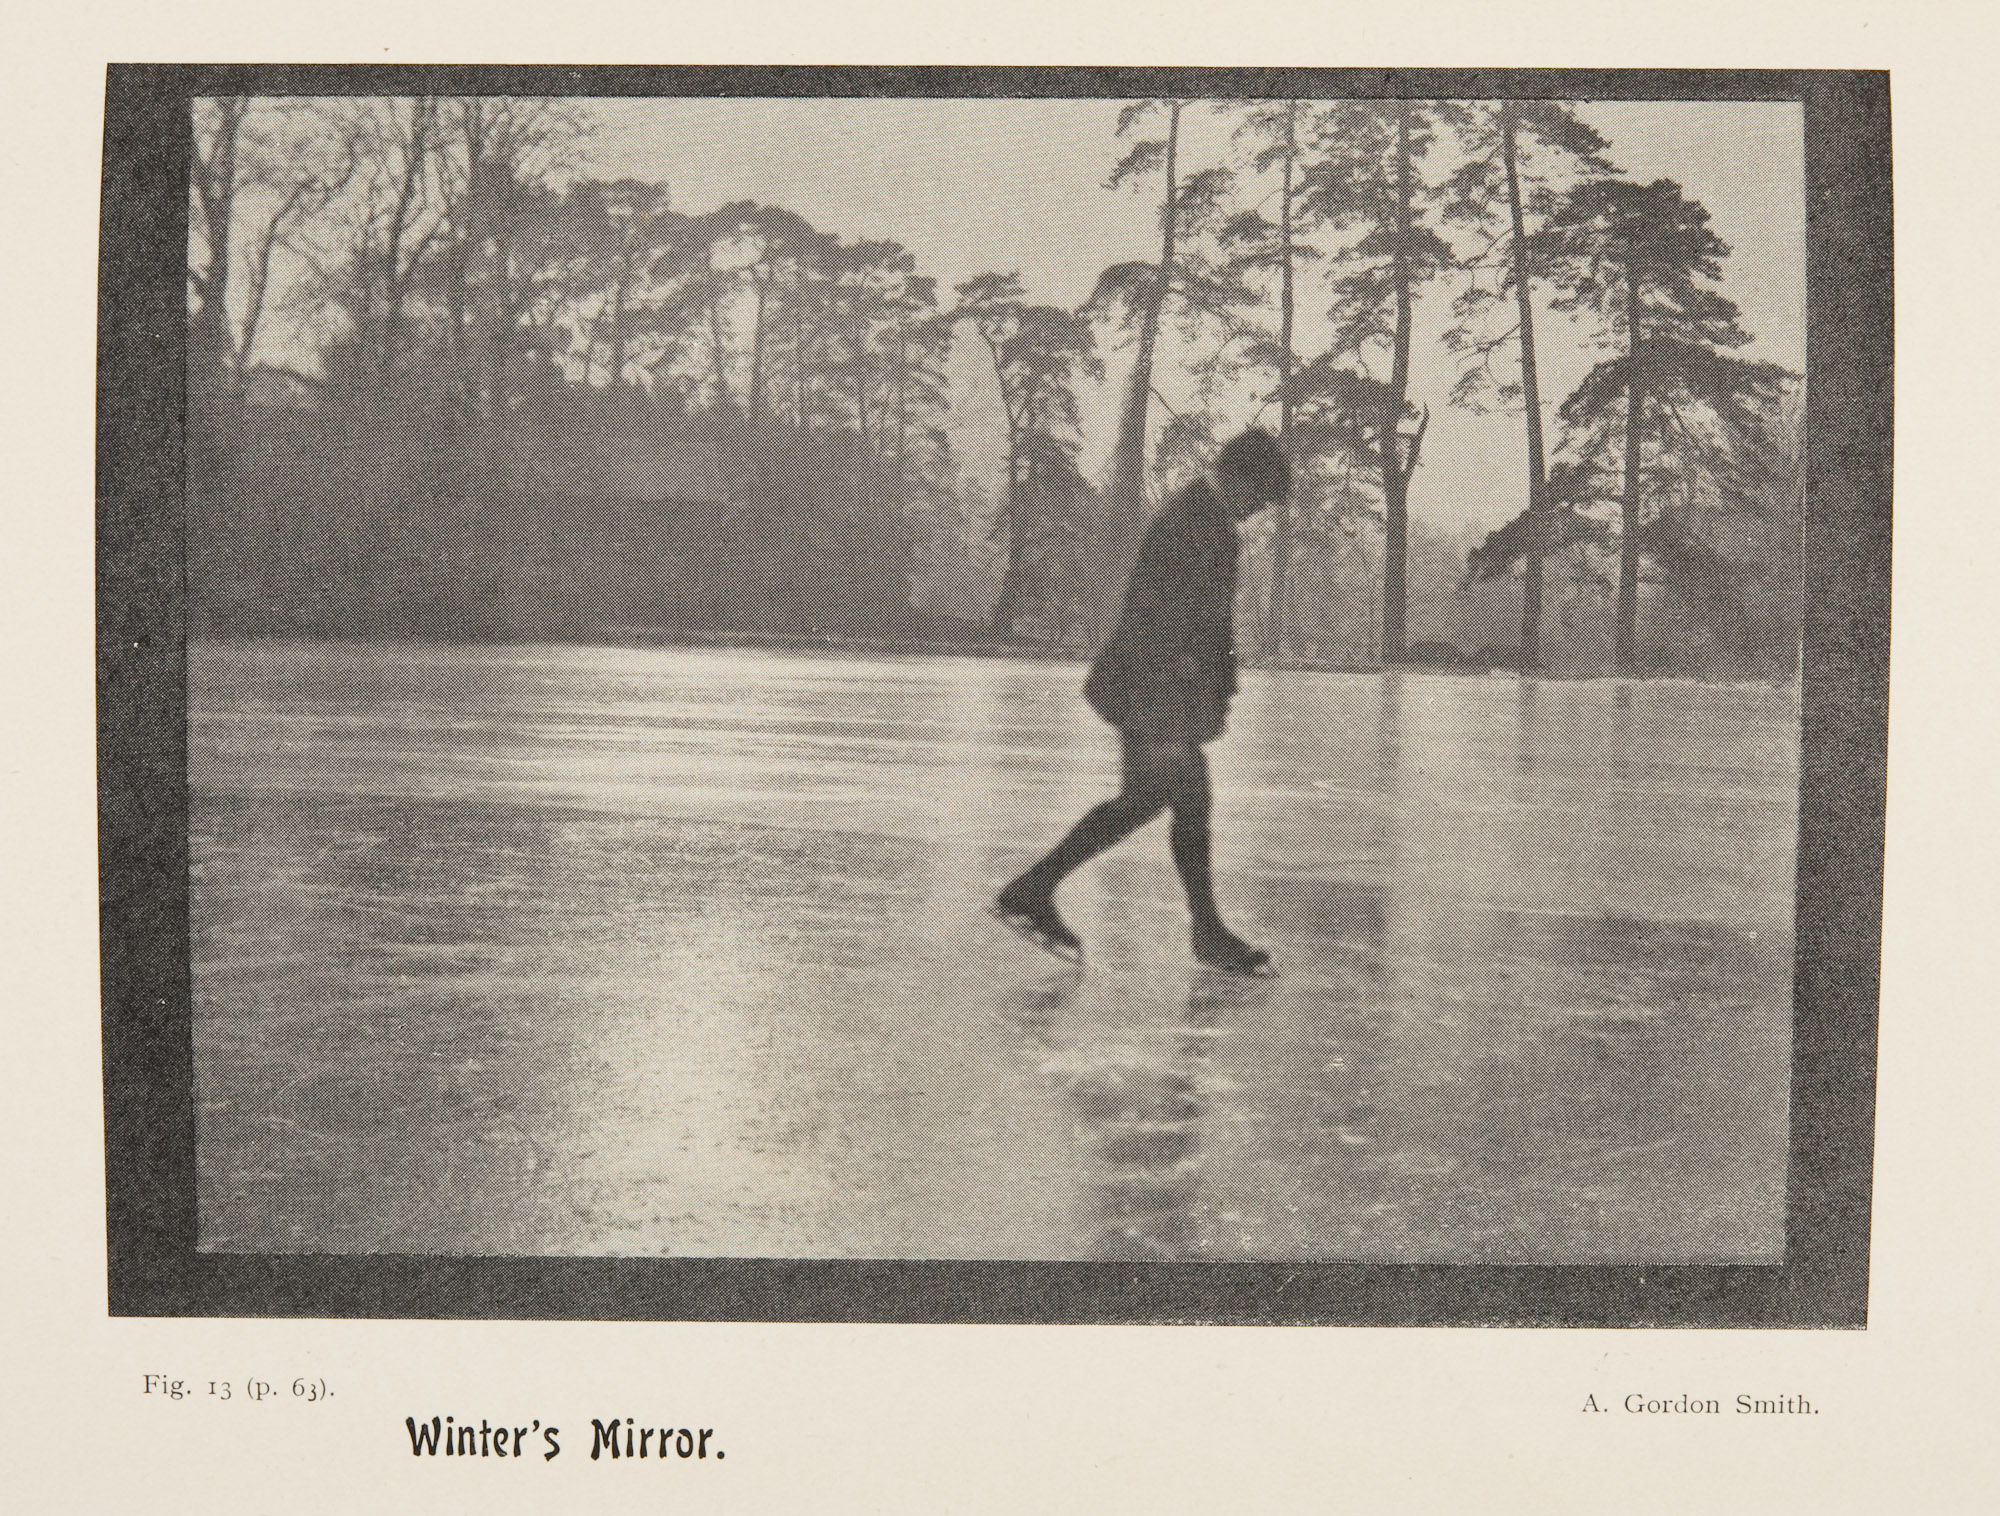 "Winter’s Mirror," by A Gordon Smith, page 30 of issue 28 of The practical photographer (1904-1906). St Andrews copy at Photo TR1.P8